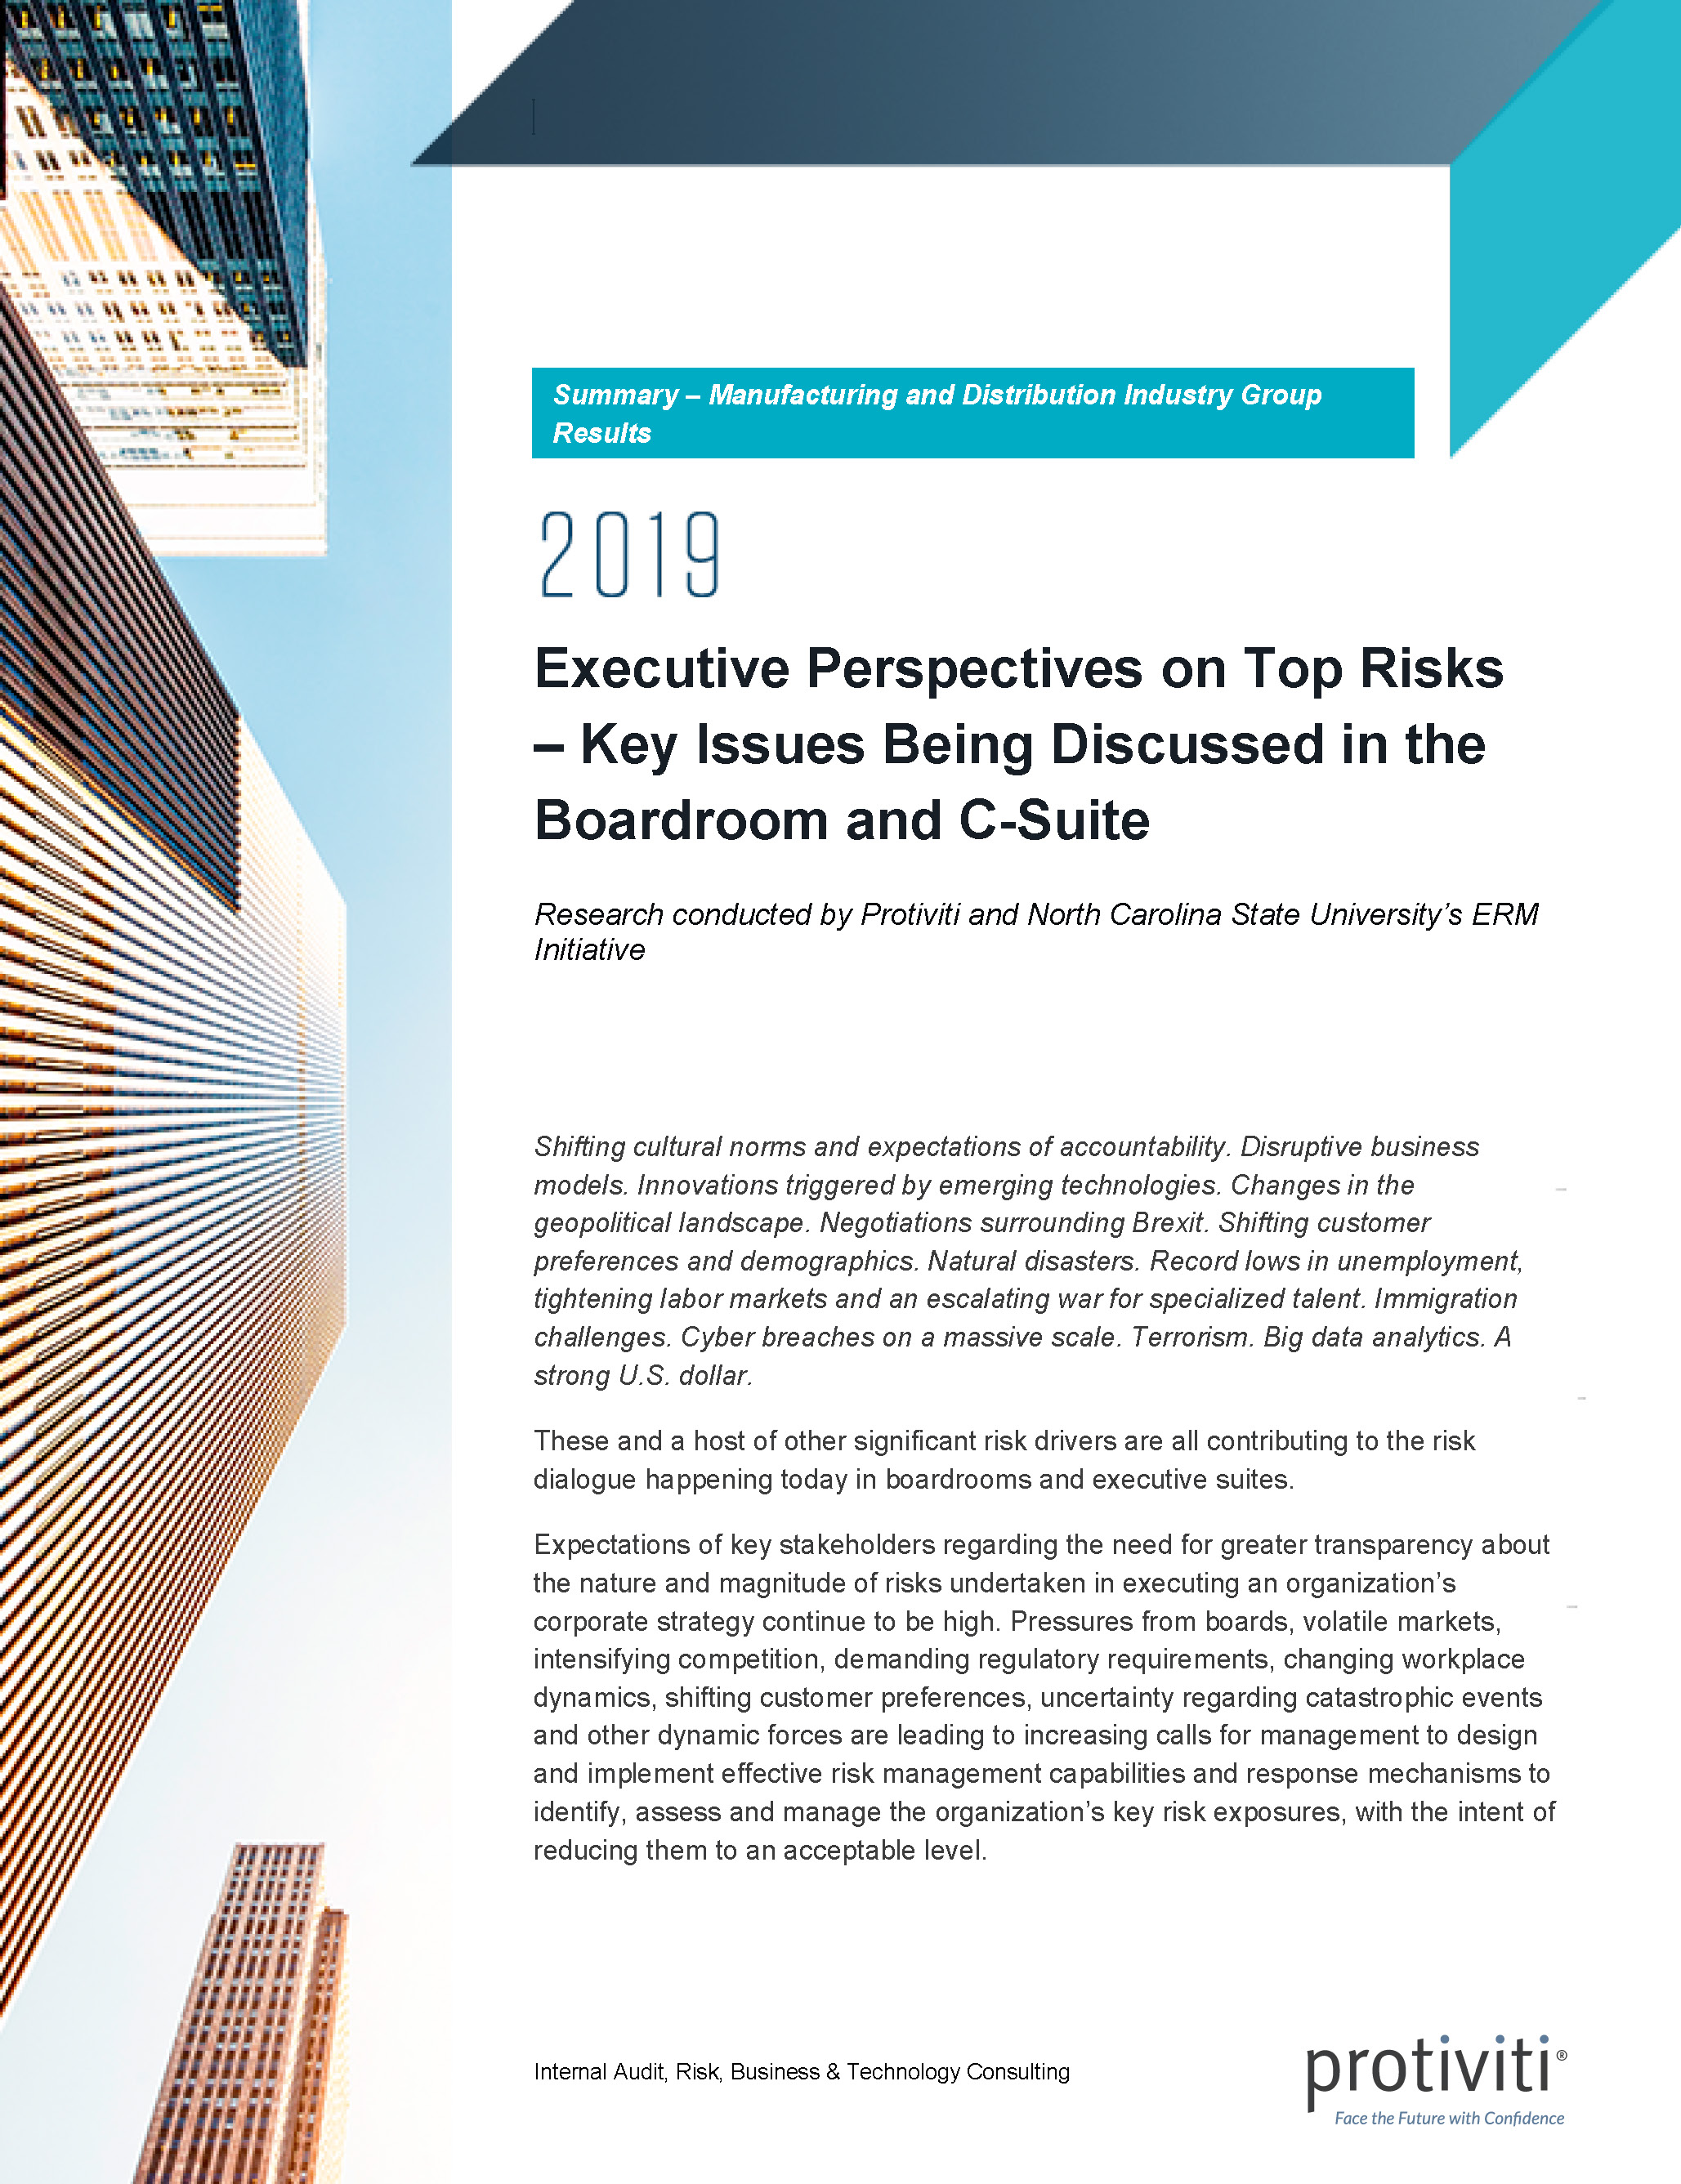 Screenshot of the first page of Executive Perspectives on Top Risks in 2019 Manufacturing and Distribution Industry Group Results